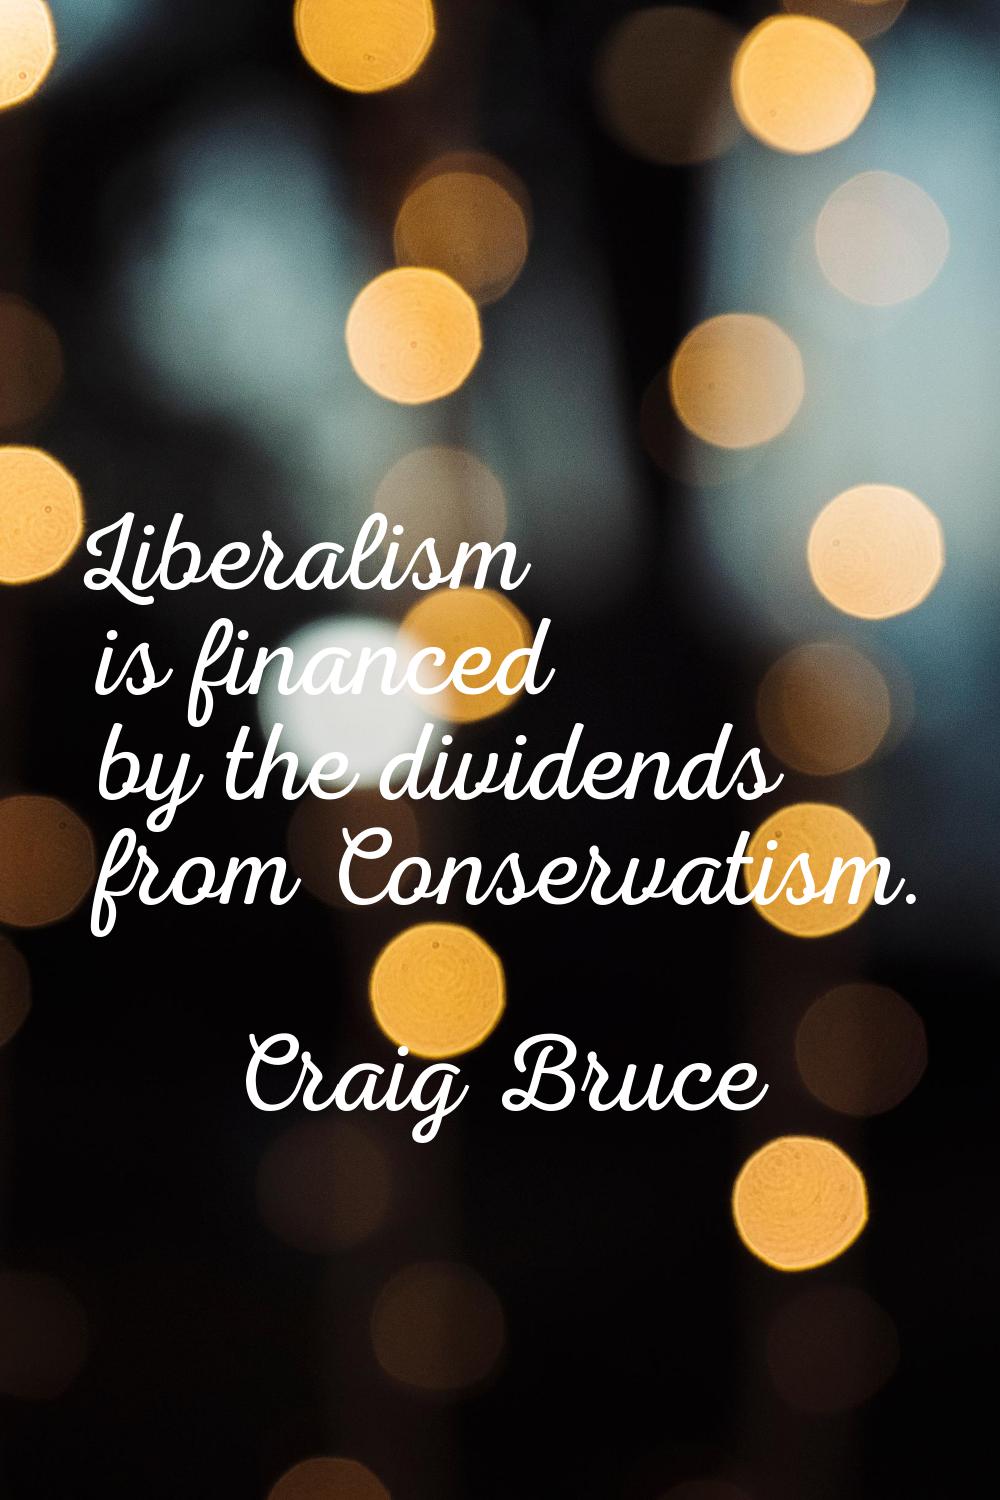 Liberalism is financed by the dividends from Conservatism.